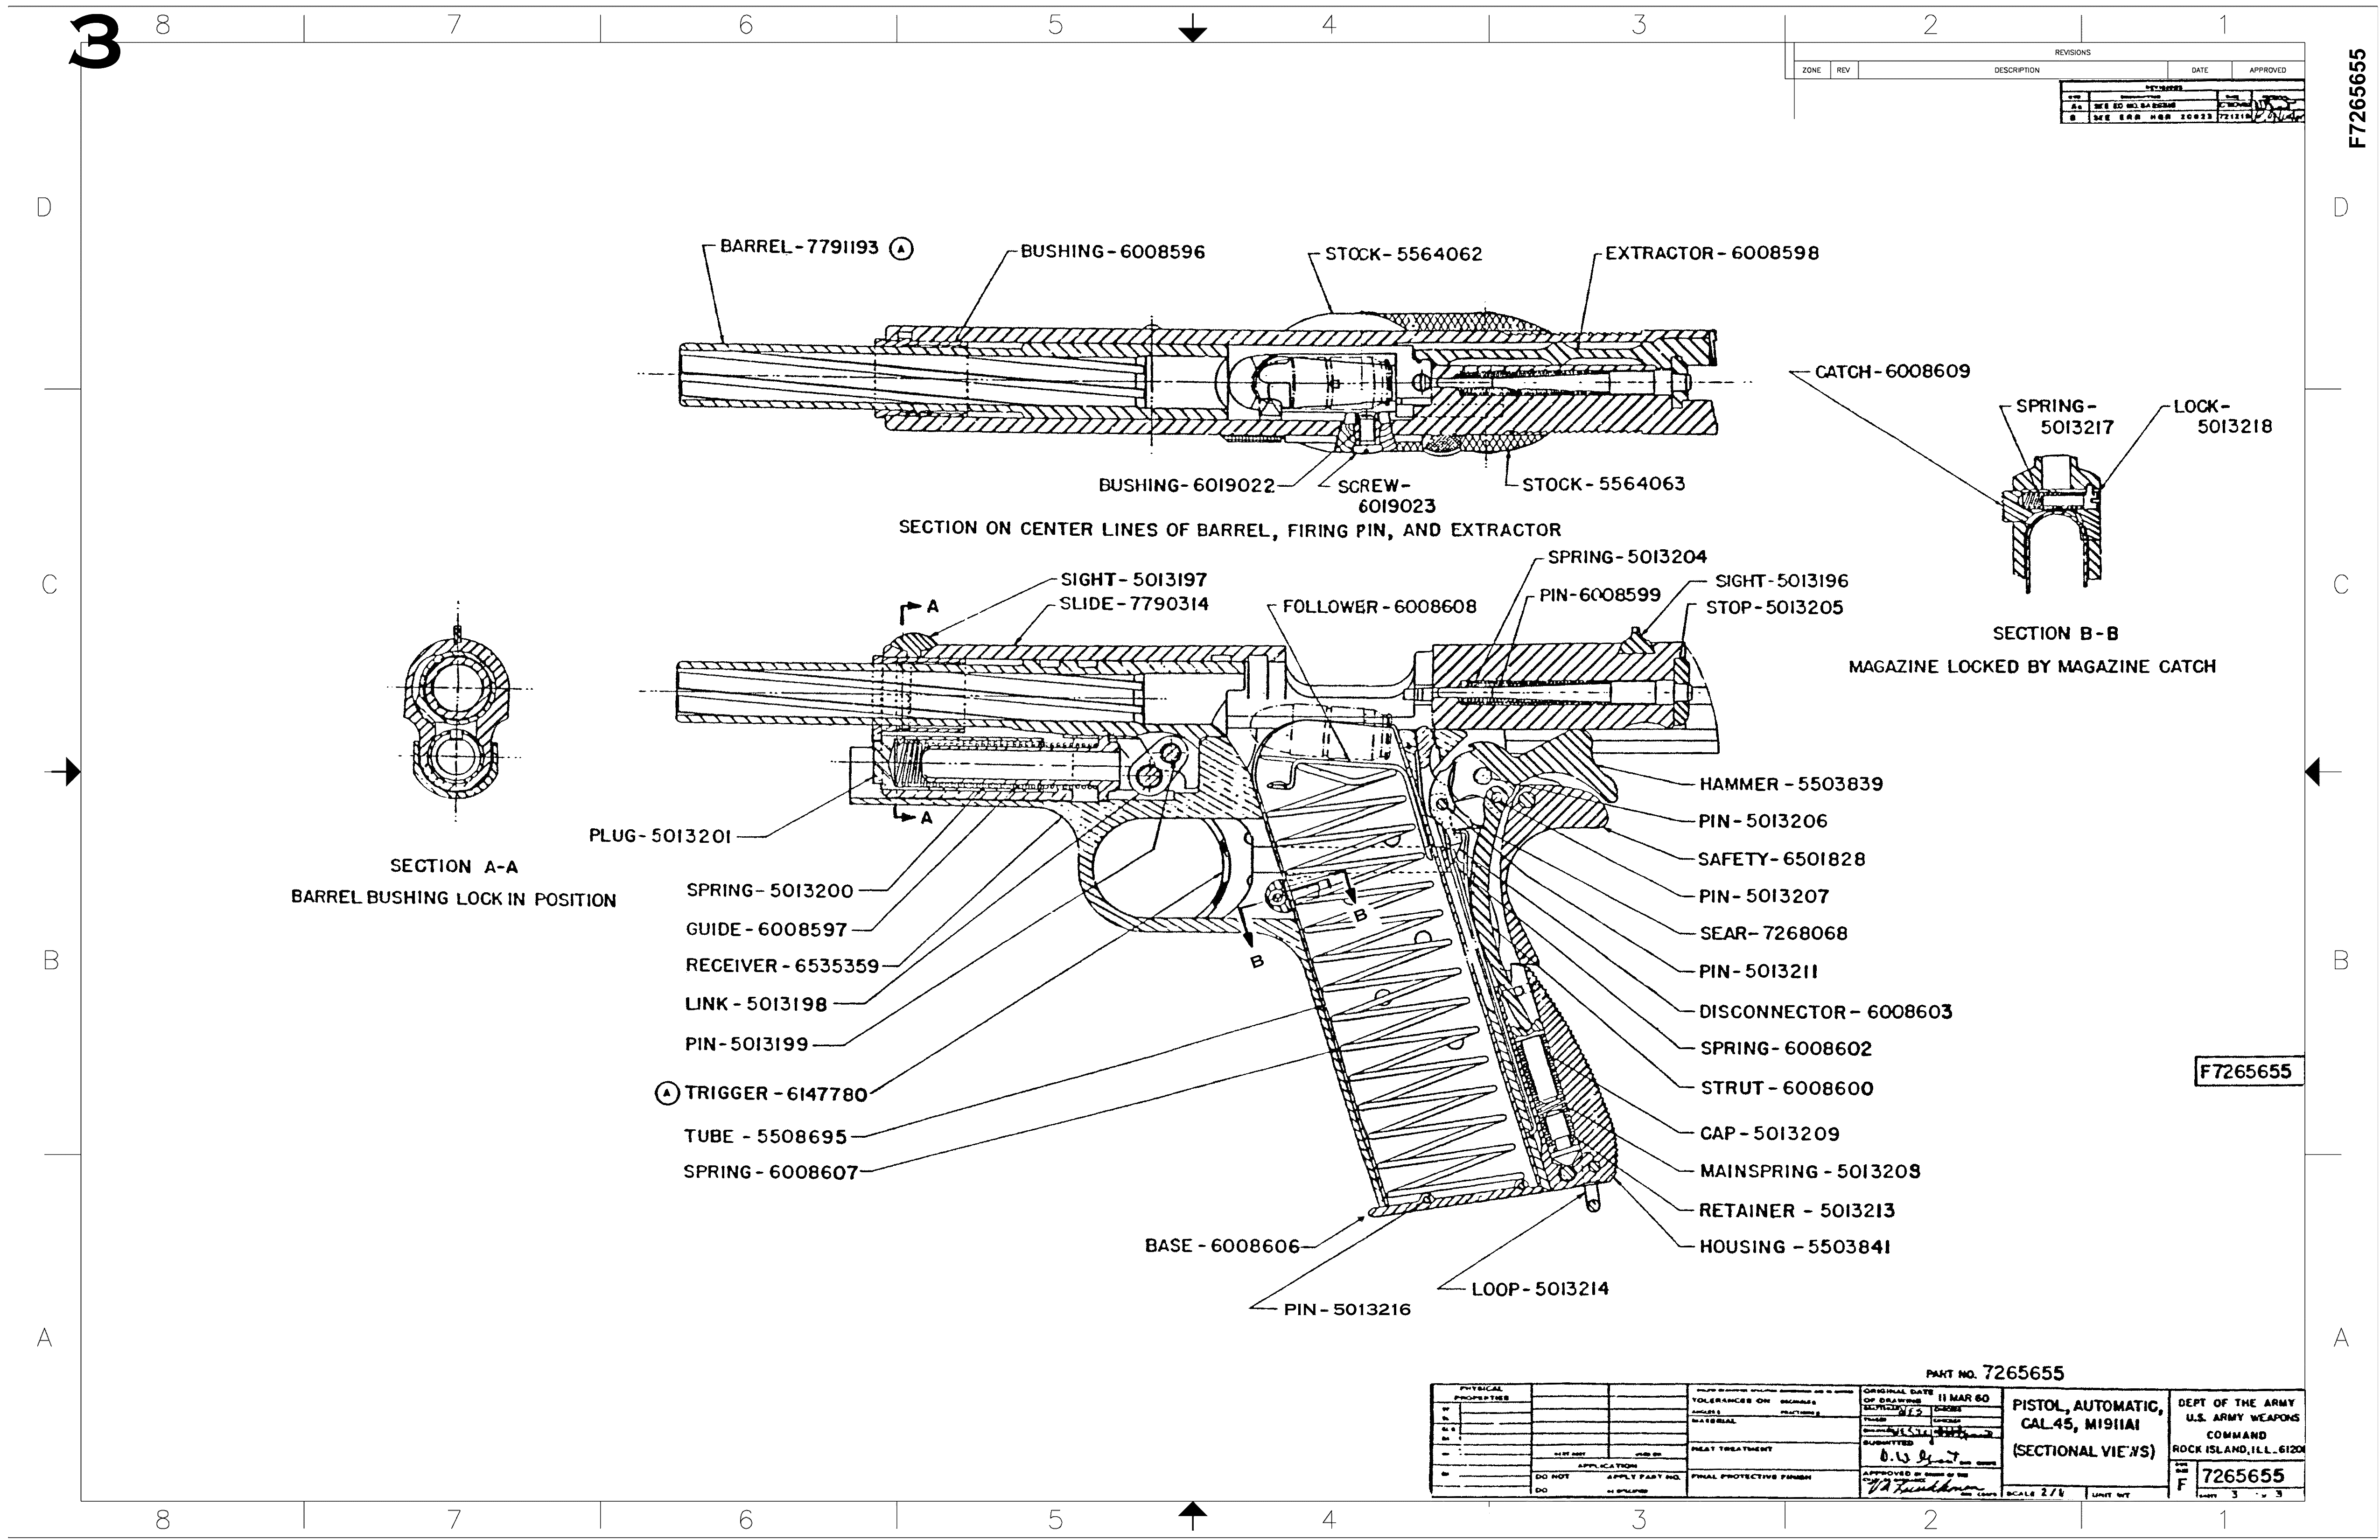 1911 Technical Drawings